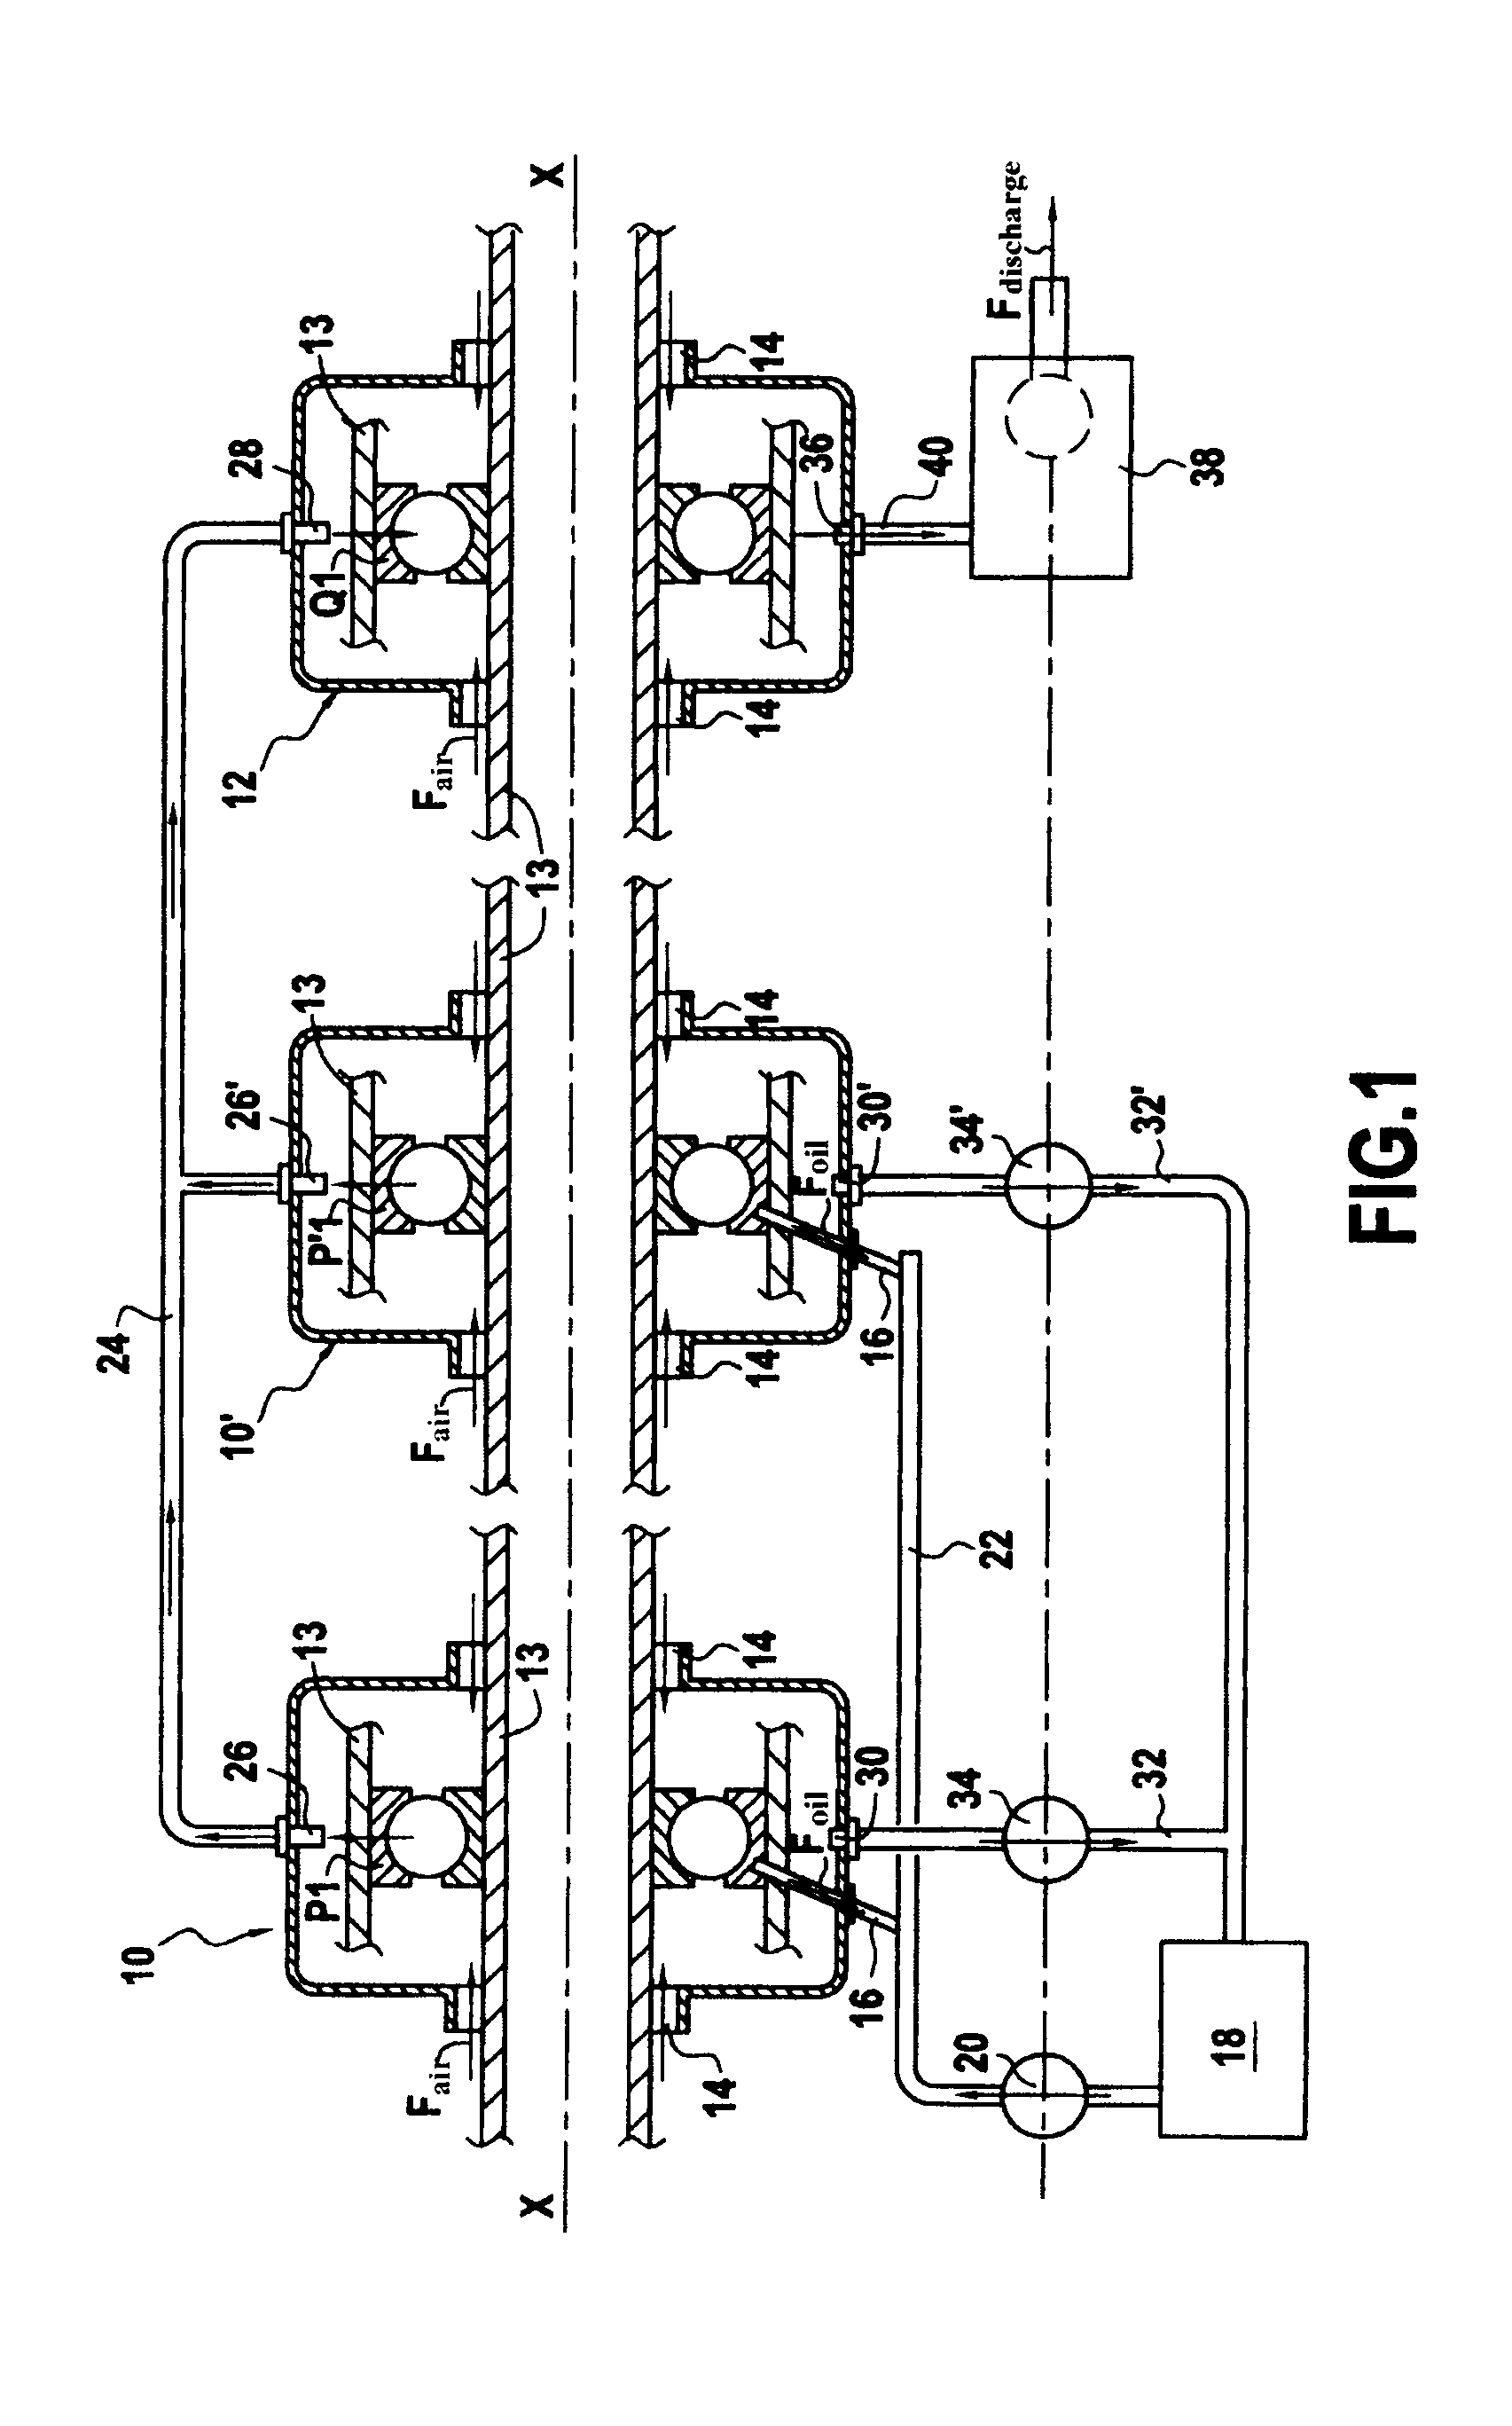 Method and system for lubricating a turbine engine